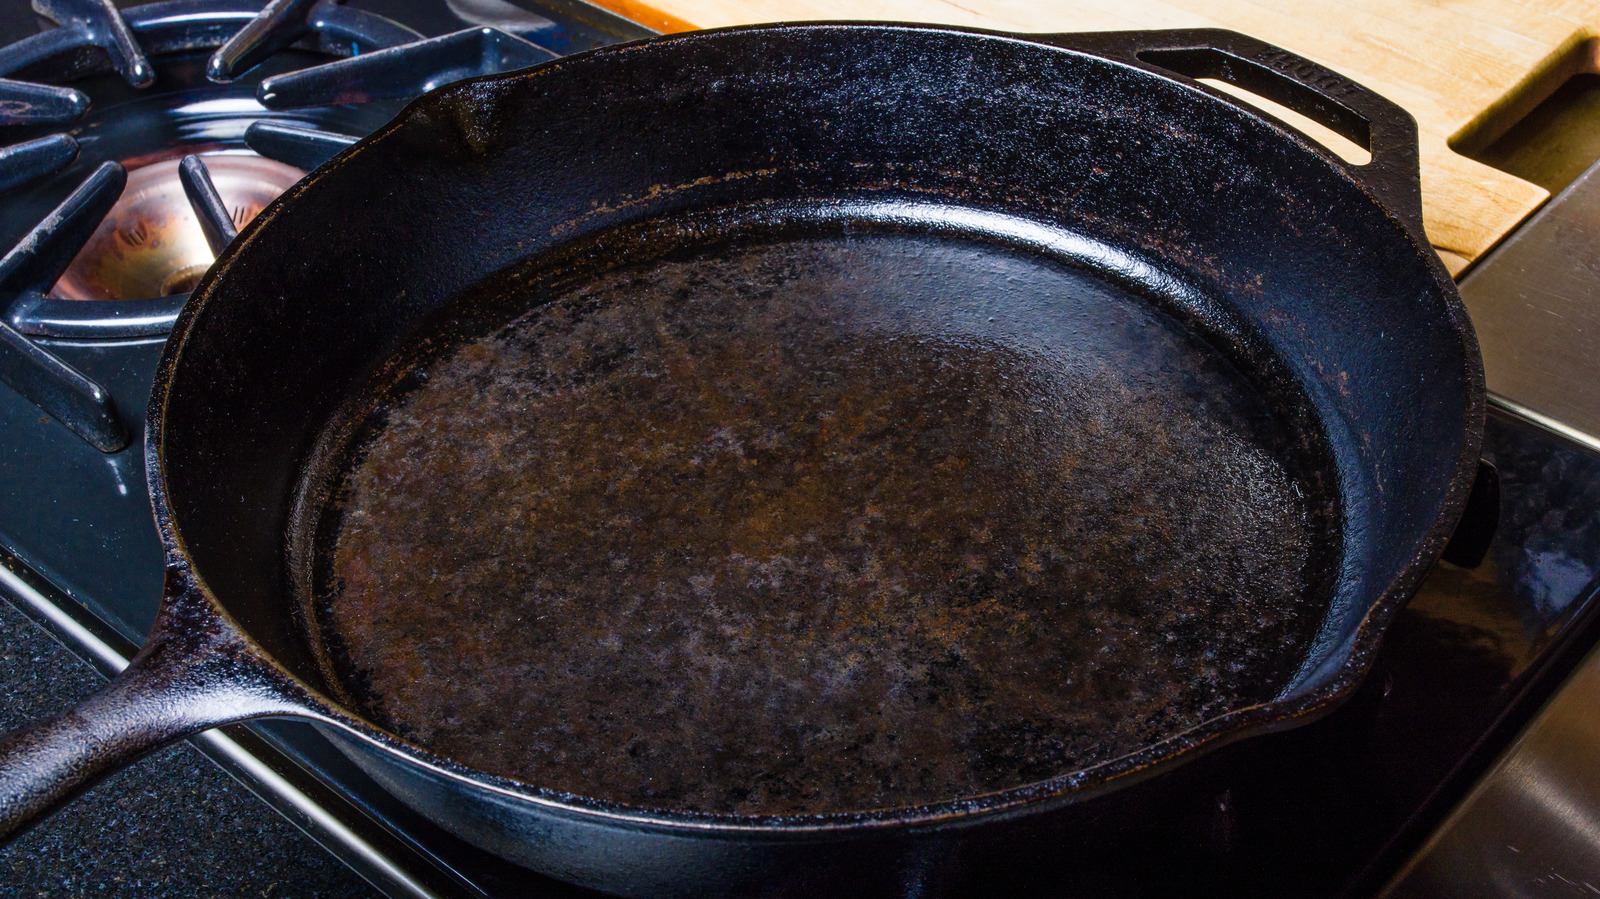 https://www.mashed.com/img/gallery/why-you-should-think-twice-about-seasoning-a-cast-iron-skillet-with-olive-oil/l-intro-1610127095.jpg